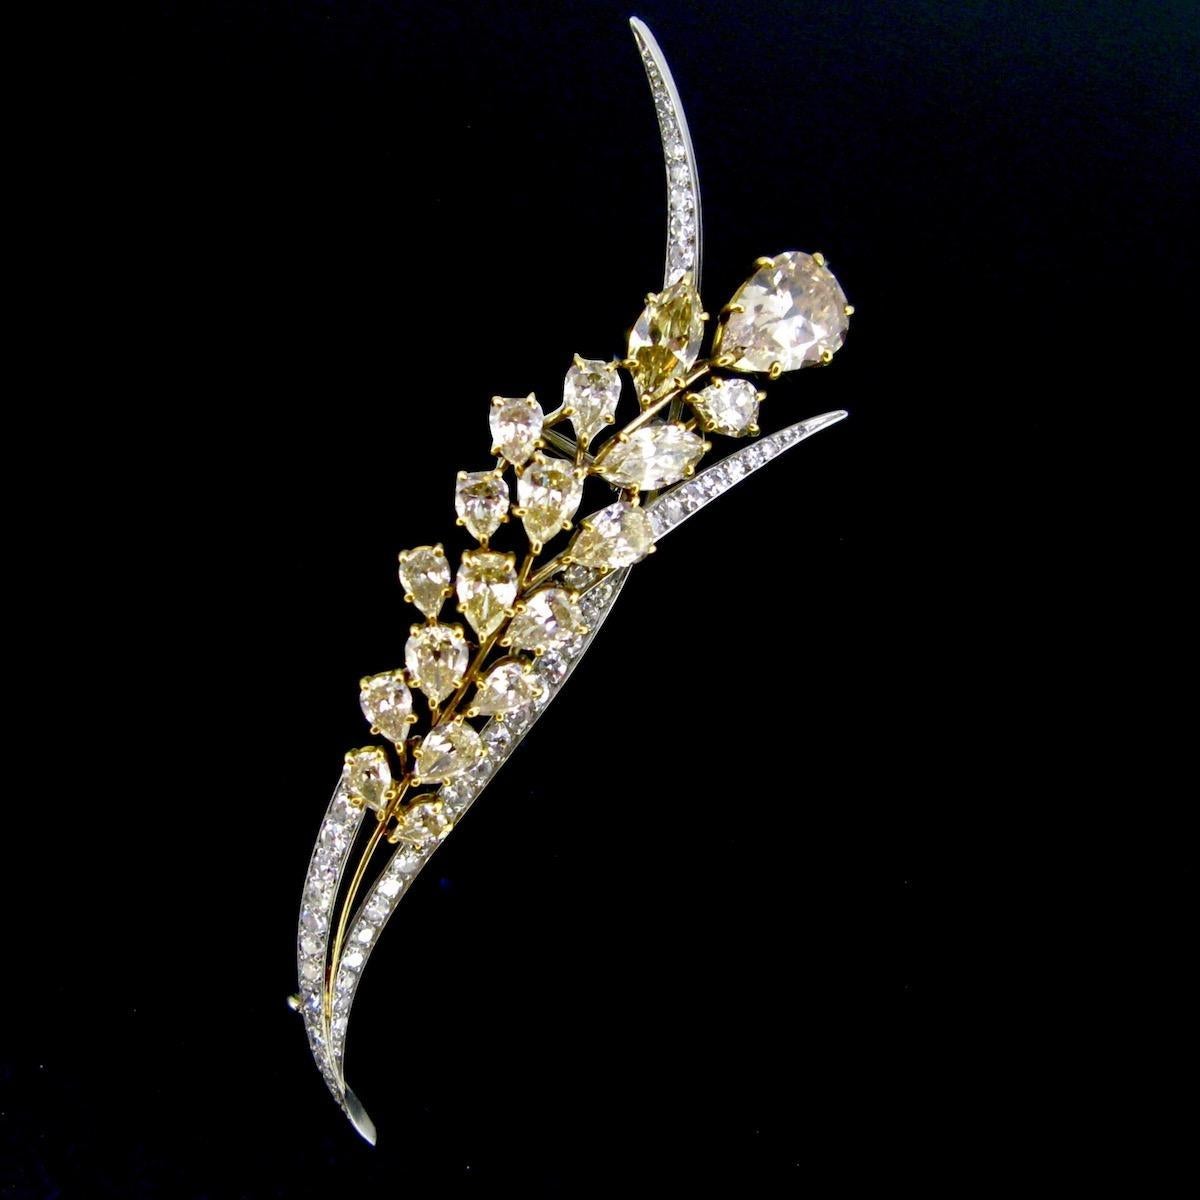 Weight:	17,8gr

Metal:	18kt yellow gold and platinum

Condition:	Very Good

Stones:	18 diamonds
•	Cut:	16 Pear cut – 2 Navette
•	Total carat weight:	8.8ct approximately
•	Colour:	Light Brown
•	Clarity:	VS/SI
	- 46 Diamonds
•	Cut:	Single
•	Total